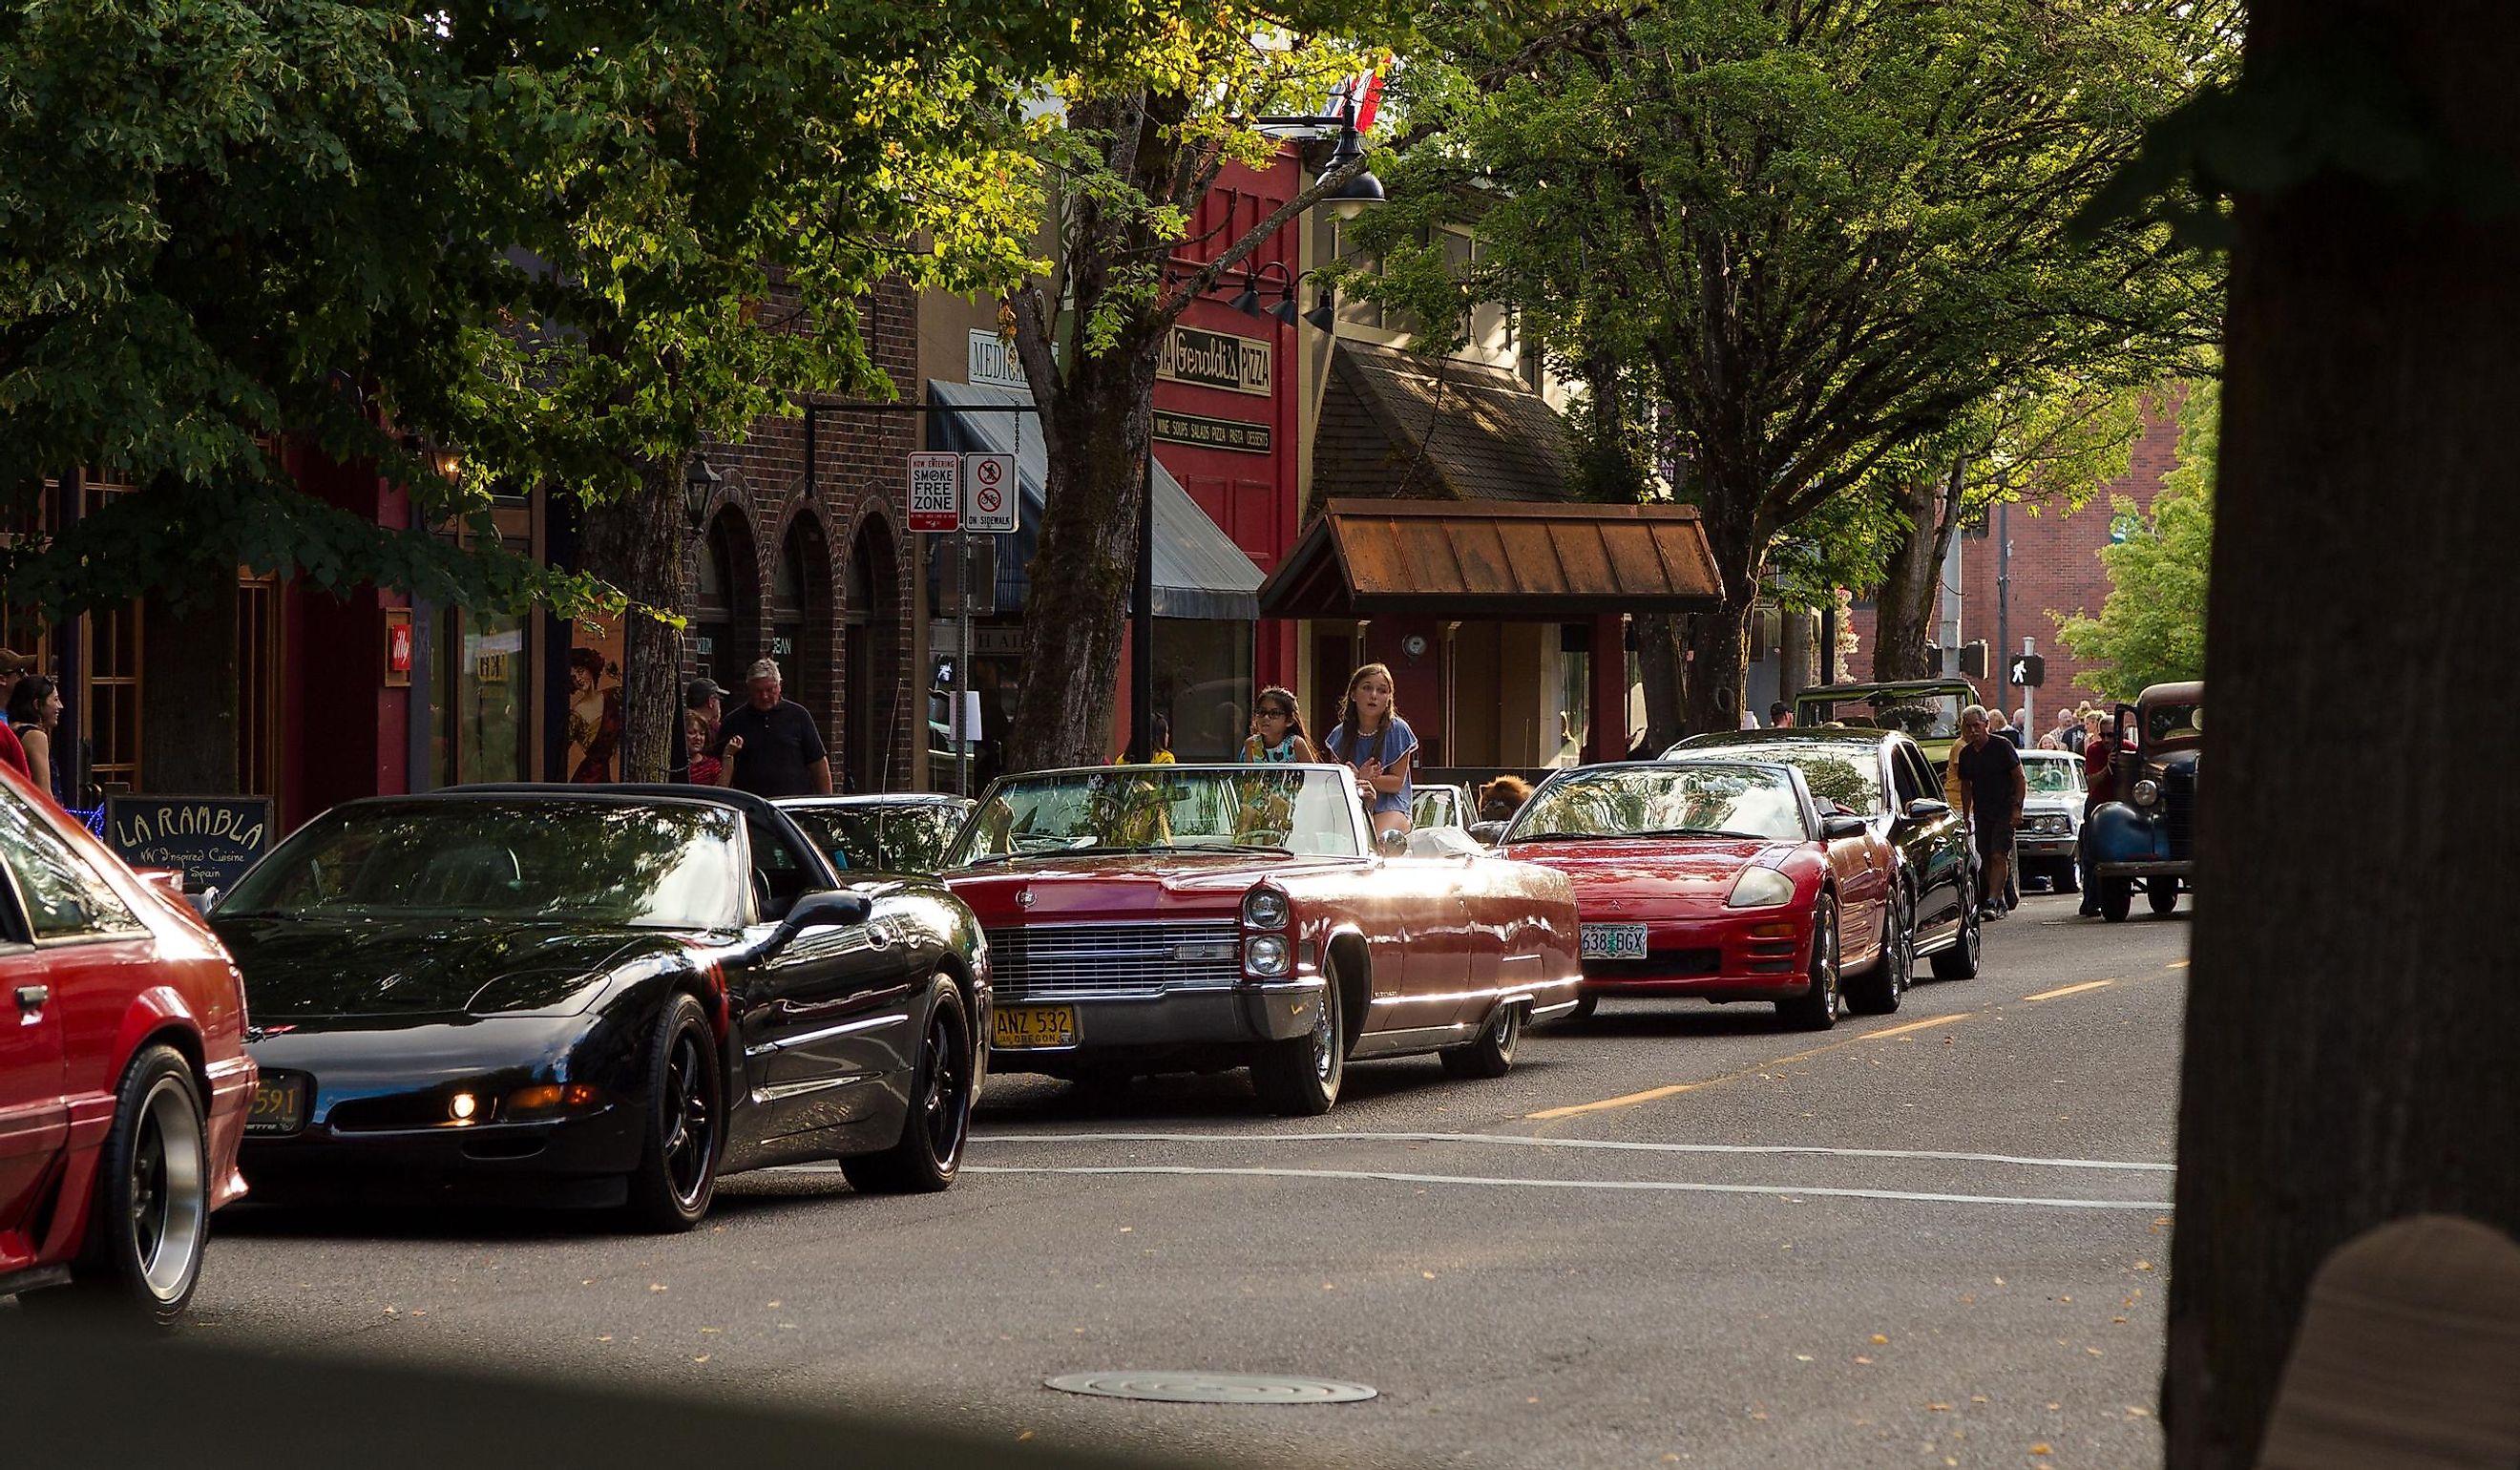 A vintage car rally in the center of downtown Mcminnville, OR.